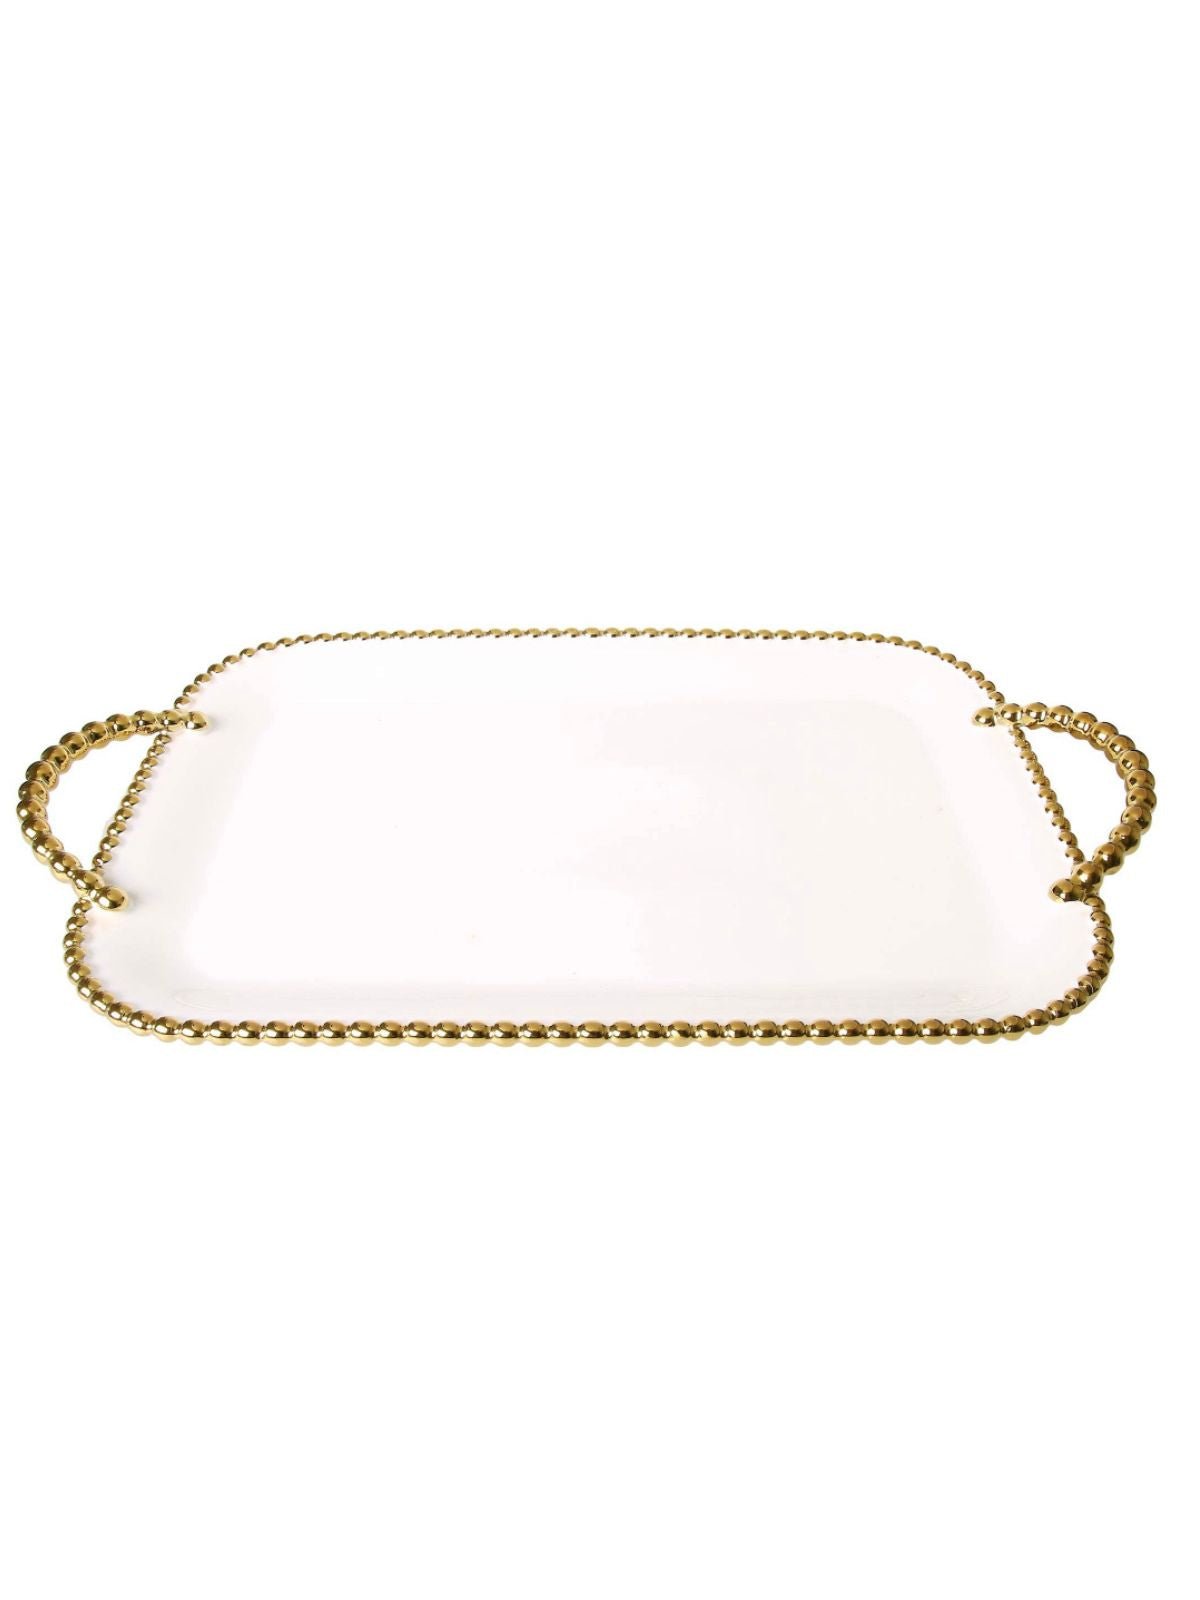 White Porcelain Serving Tray With Luxury Gold Beaded Edges and Handles, 19.5L x 10.5W.